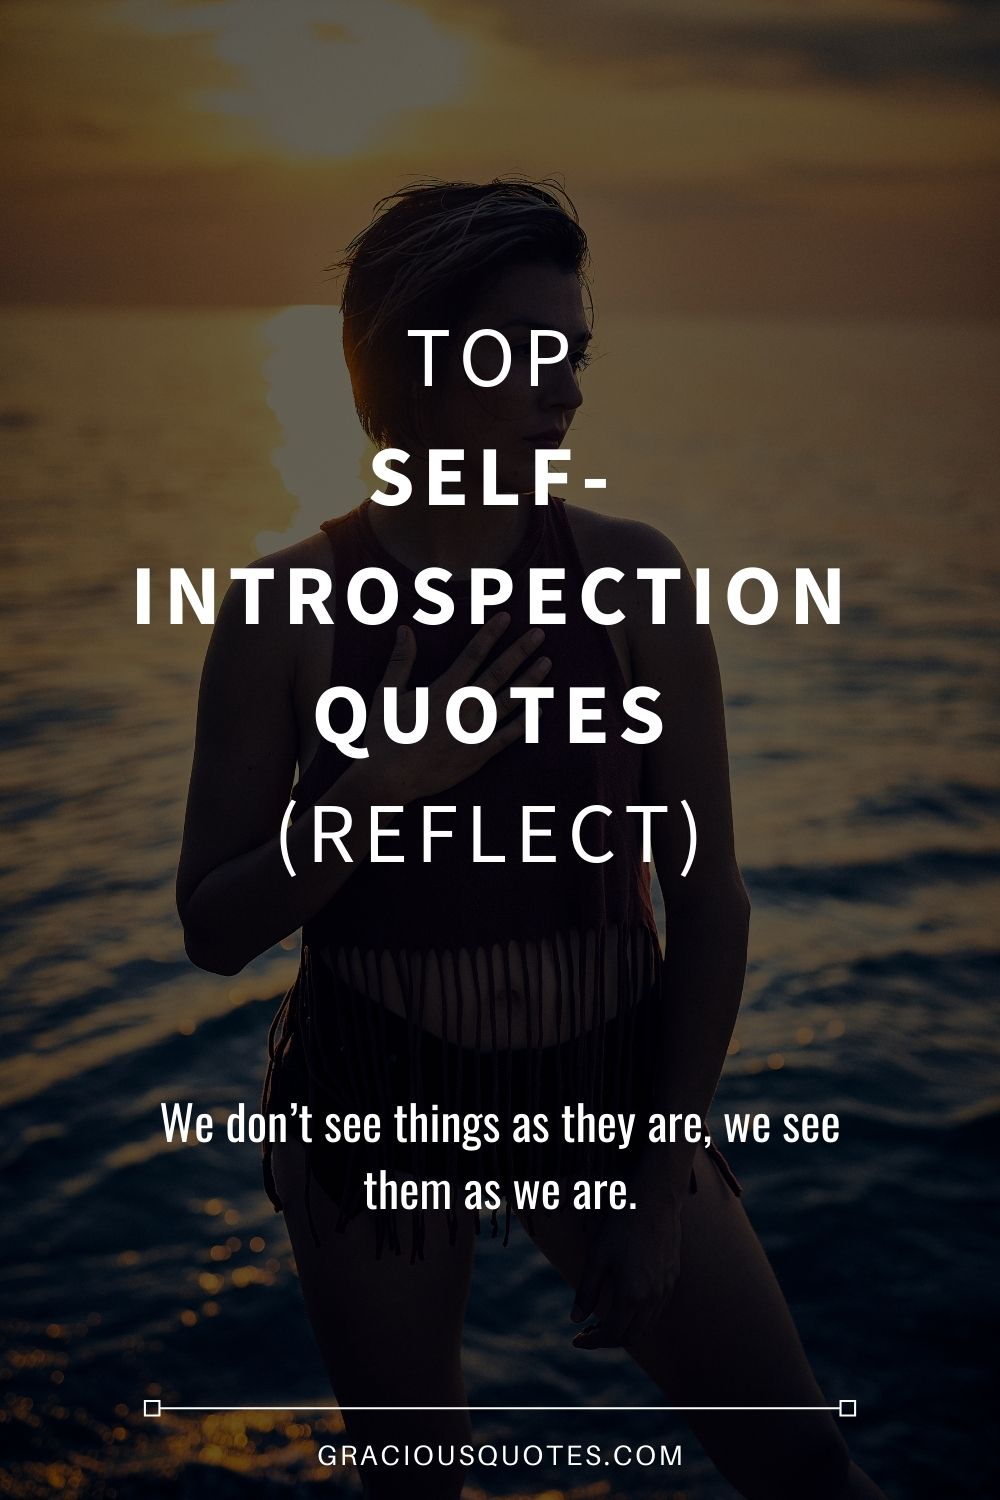 Top Self-Introspection Quotes (REFLECT) - Gracious Quotes